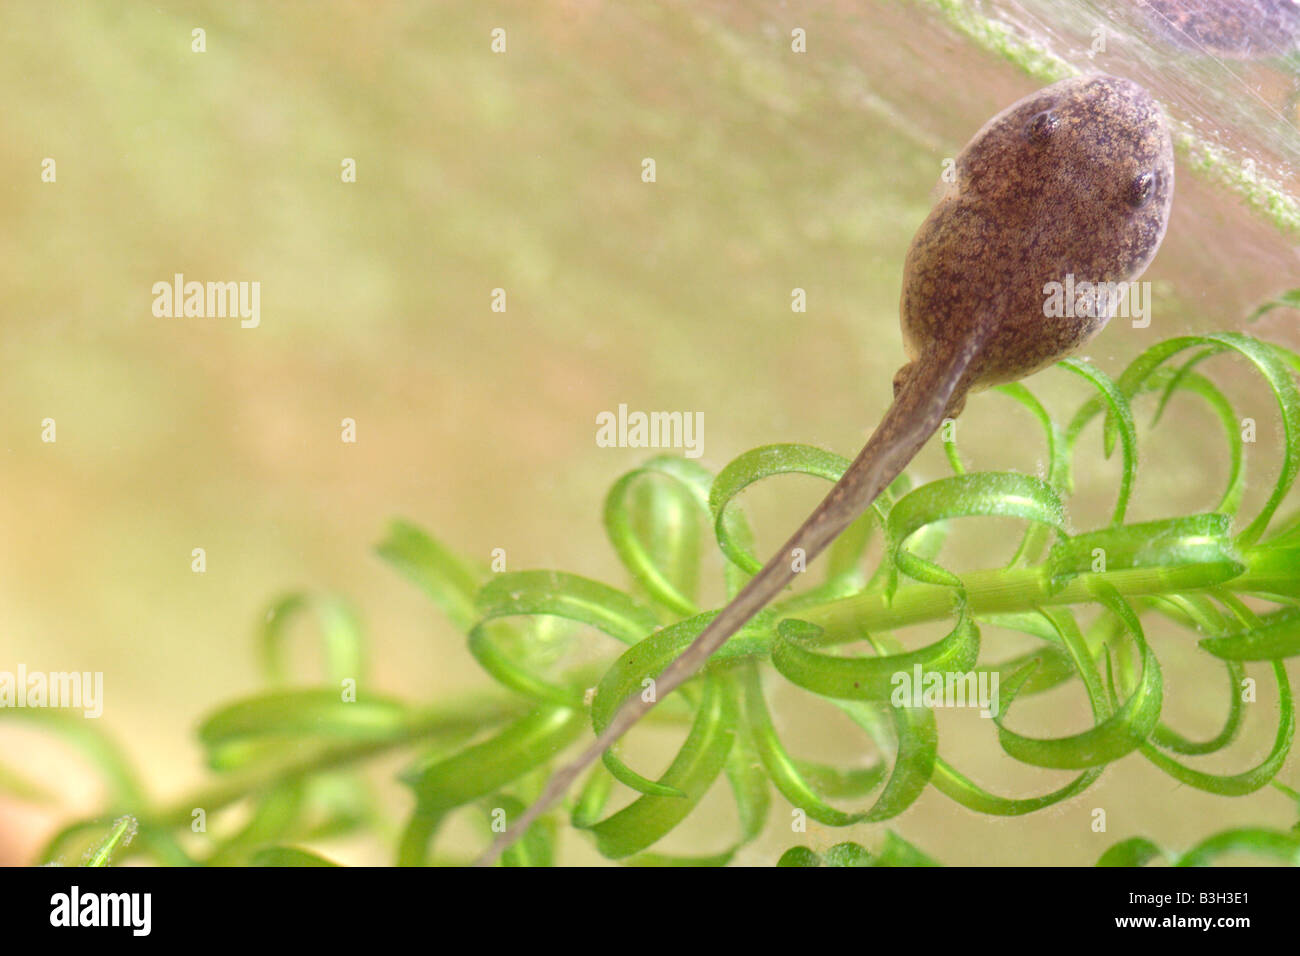 Developing tadpole showing rear hind legs, UK Stock Photo